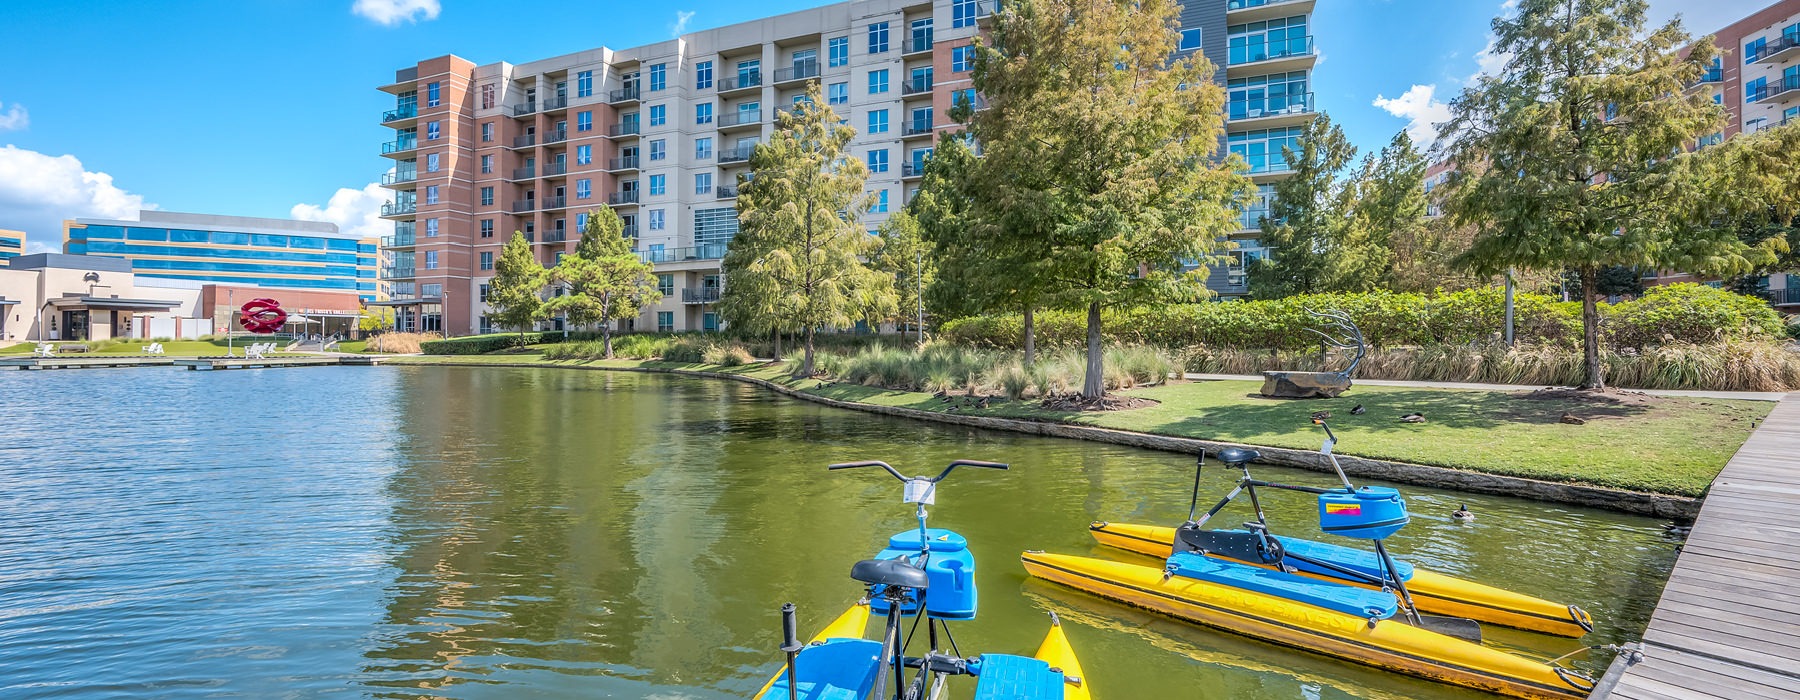 The Woodlands lake with kayaking